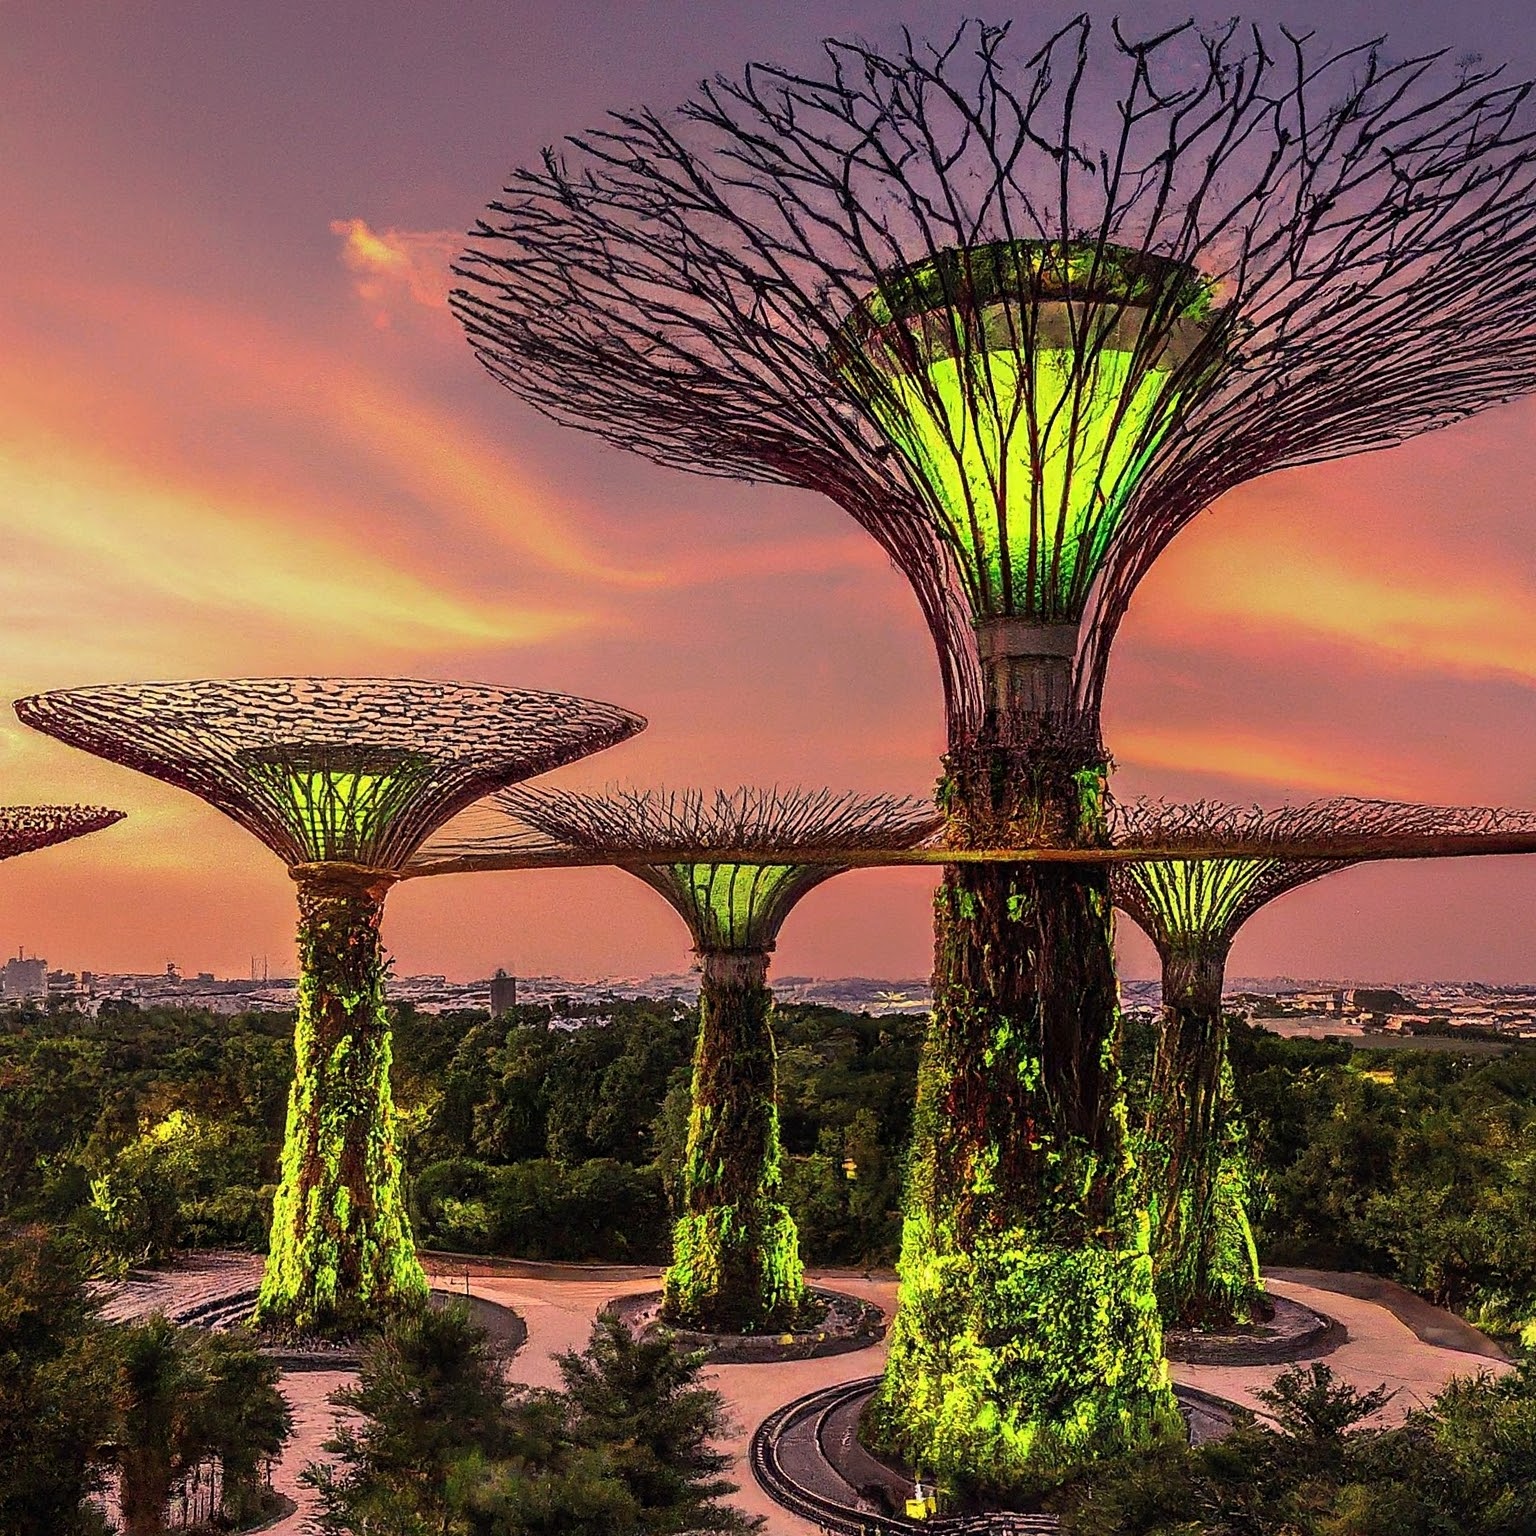 Supertrees Grove at Gardens by the Bay illuminated at sunset, Singapore.